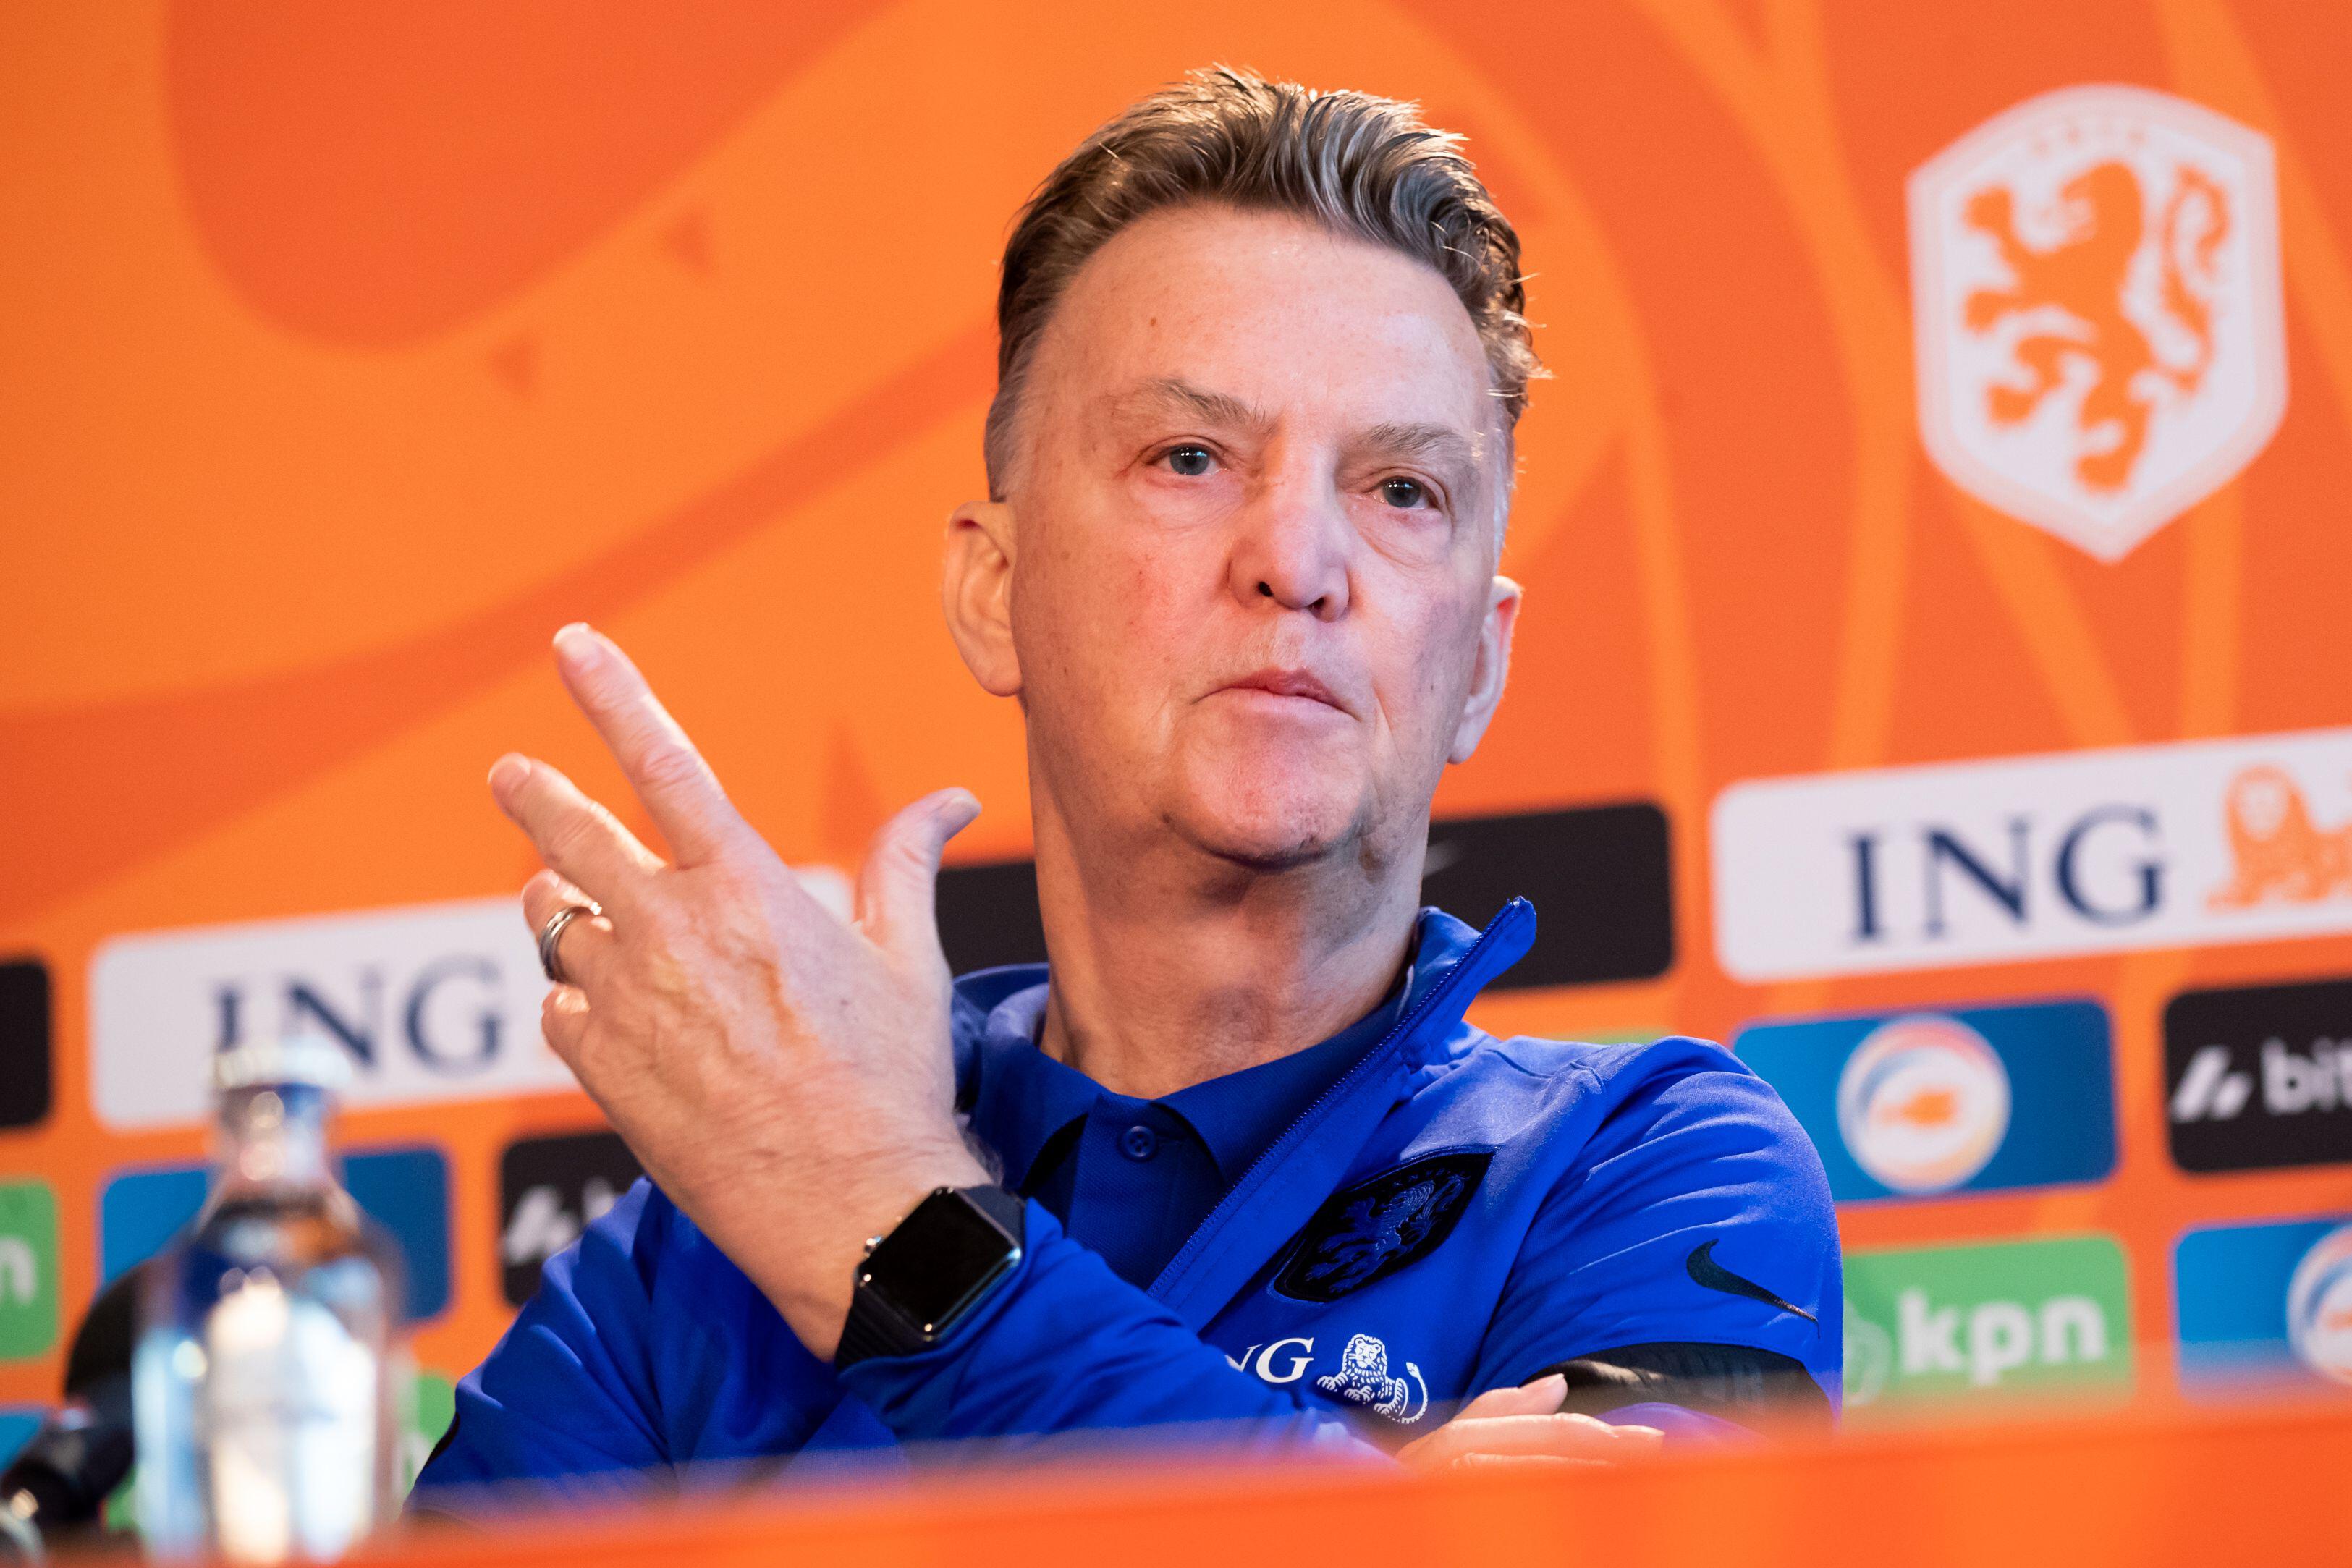 FIFA’s main motive is about money and commercial interests, asserts Louis van Gaal